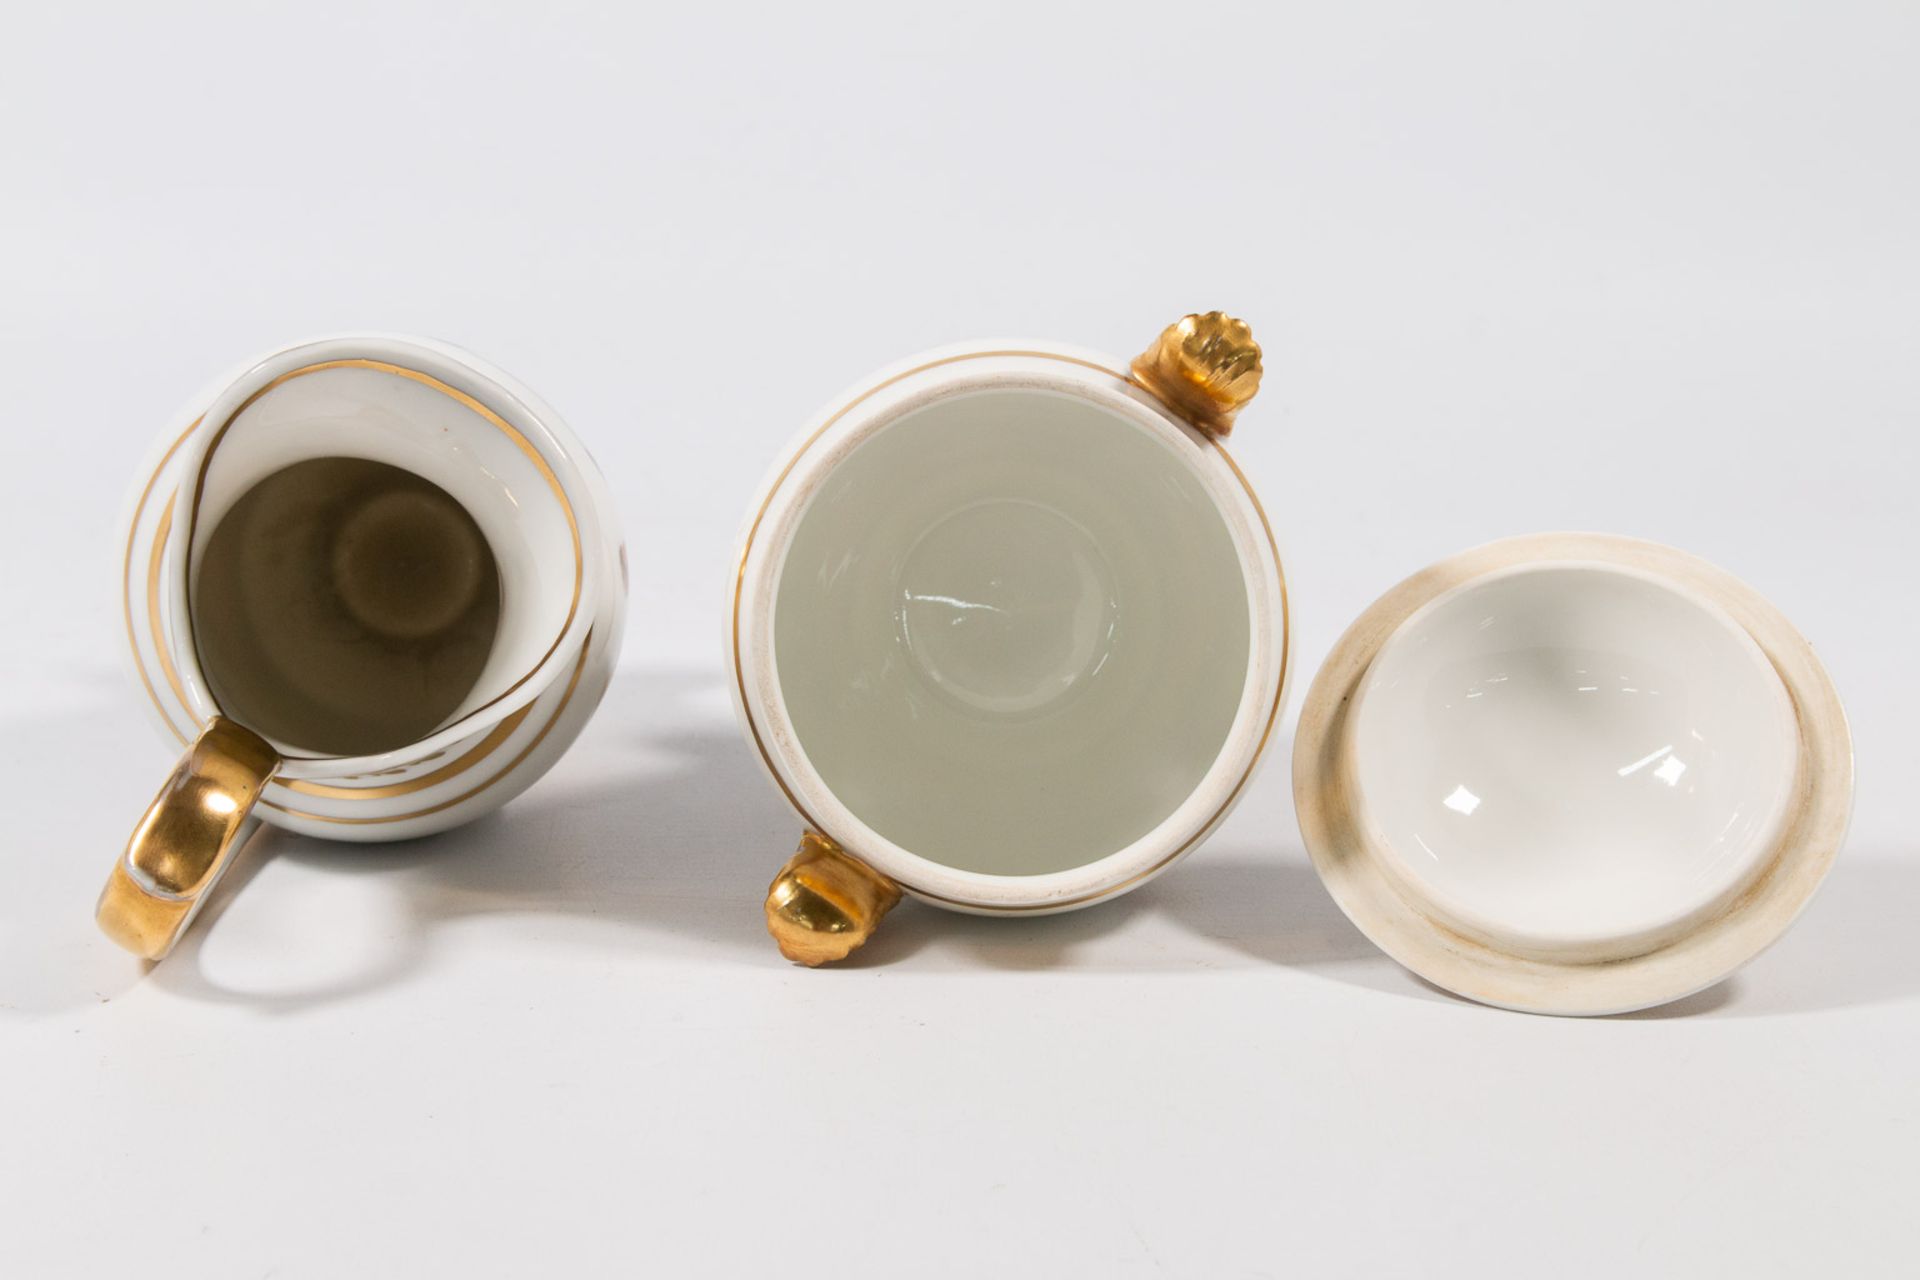 A Complete 'Vieux Bruxelles' coffee and tea service made of porcelain. - Image 20 of 53